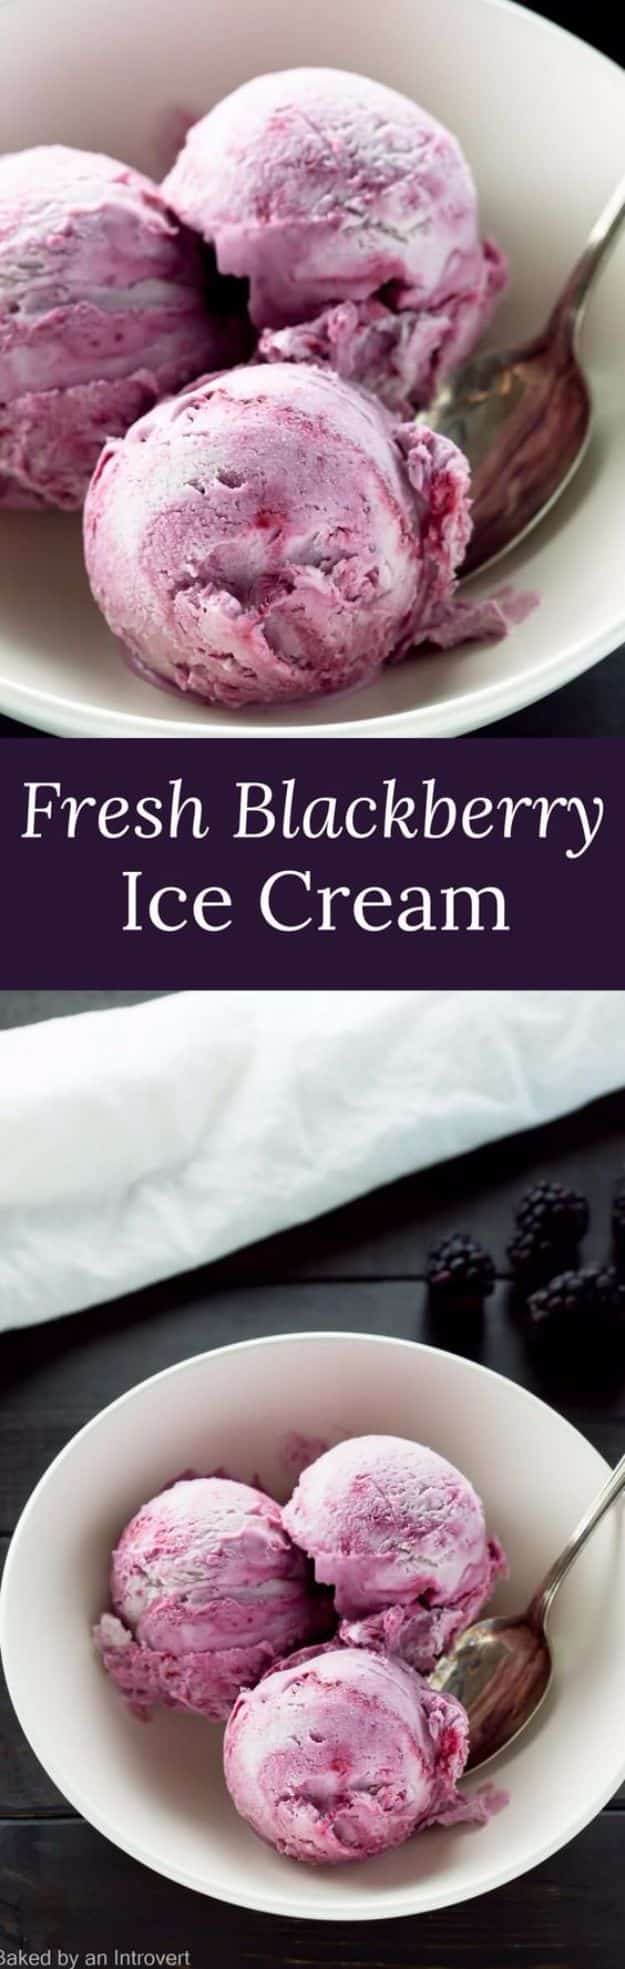 Best Recipe Ideas for Summer - Fresh Blackberry Ice Cream - Cool Salads, Easy Side Dishes, Recipes for Summer Foods and Dinner to Beat the Heat - Light and Healthy Ideas for Hot Summer Nights, Pool Parties and Picnics http://diyjoy.com/best-recipes-summer